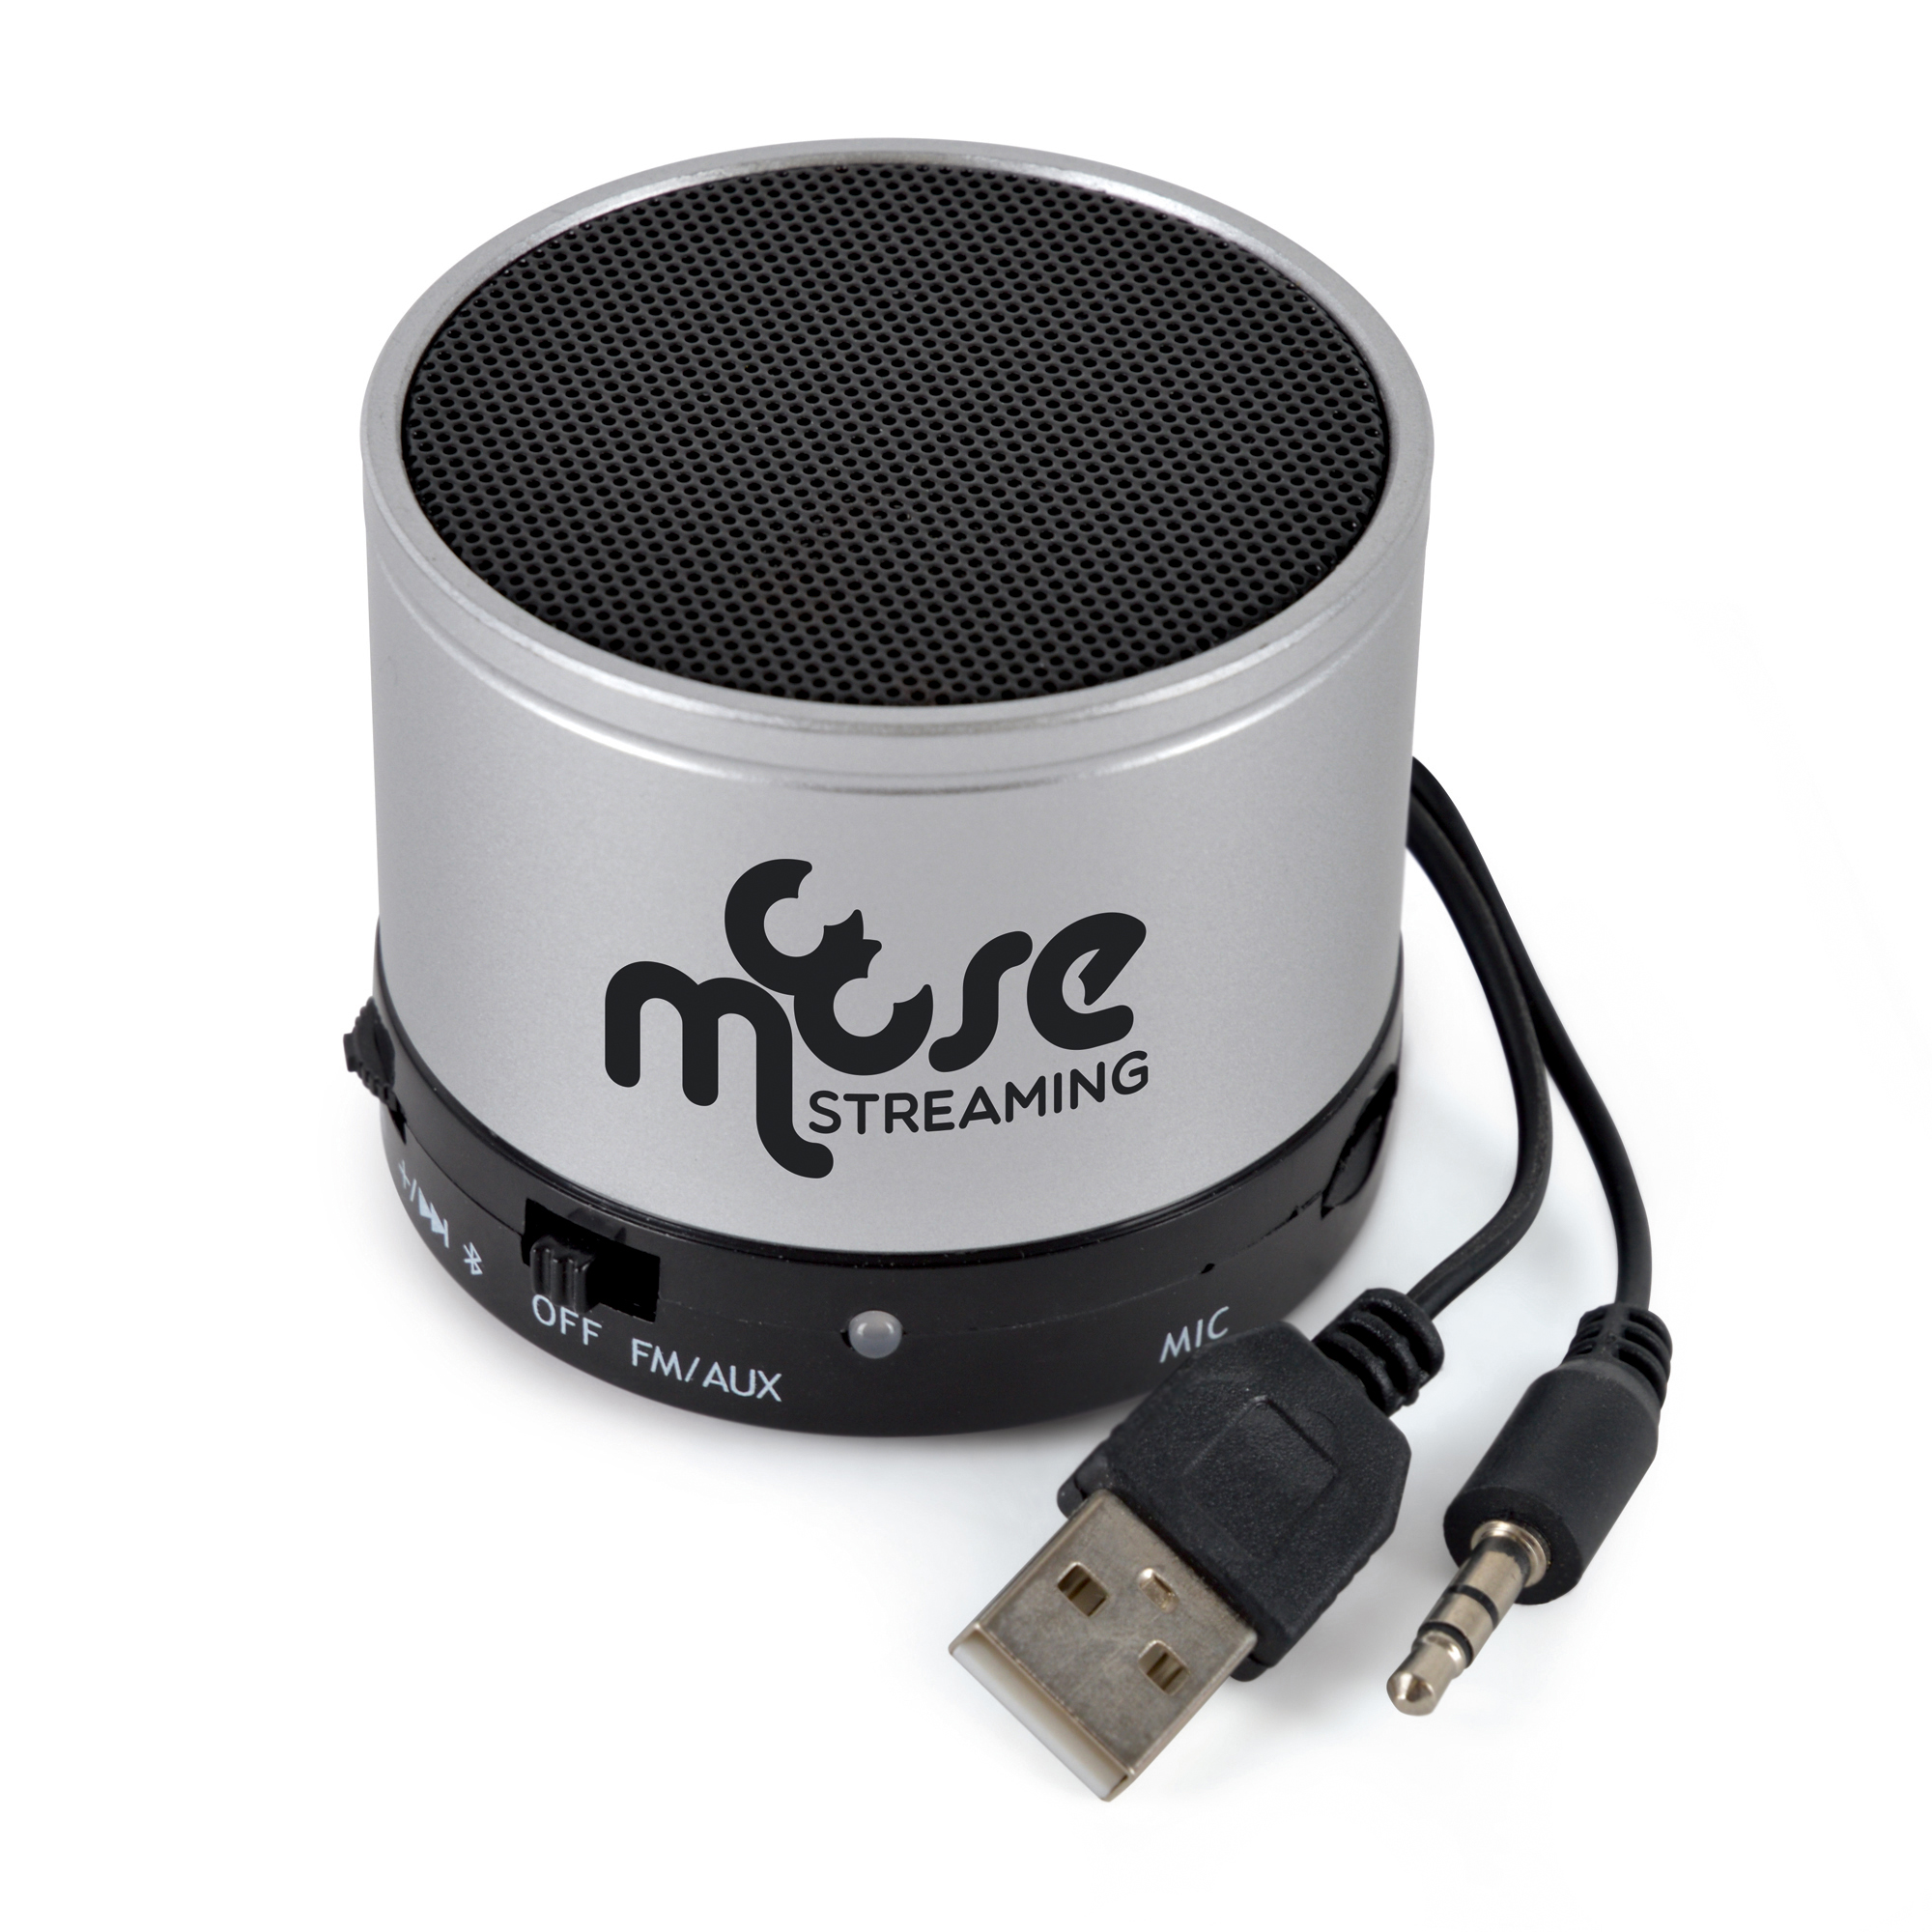 Bluetooth speaker with 2-in-1 cable with mini USB, USB and 3.5mm headphone jack,micro SD card slot, built-in-microphone and operates to a distance of approx. 10m unobstructed. Recharges via USB and user manual is included. Packaged in a black box.